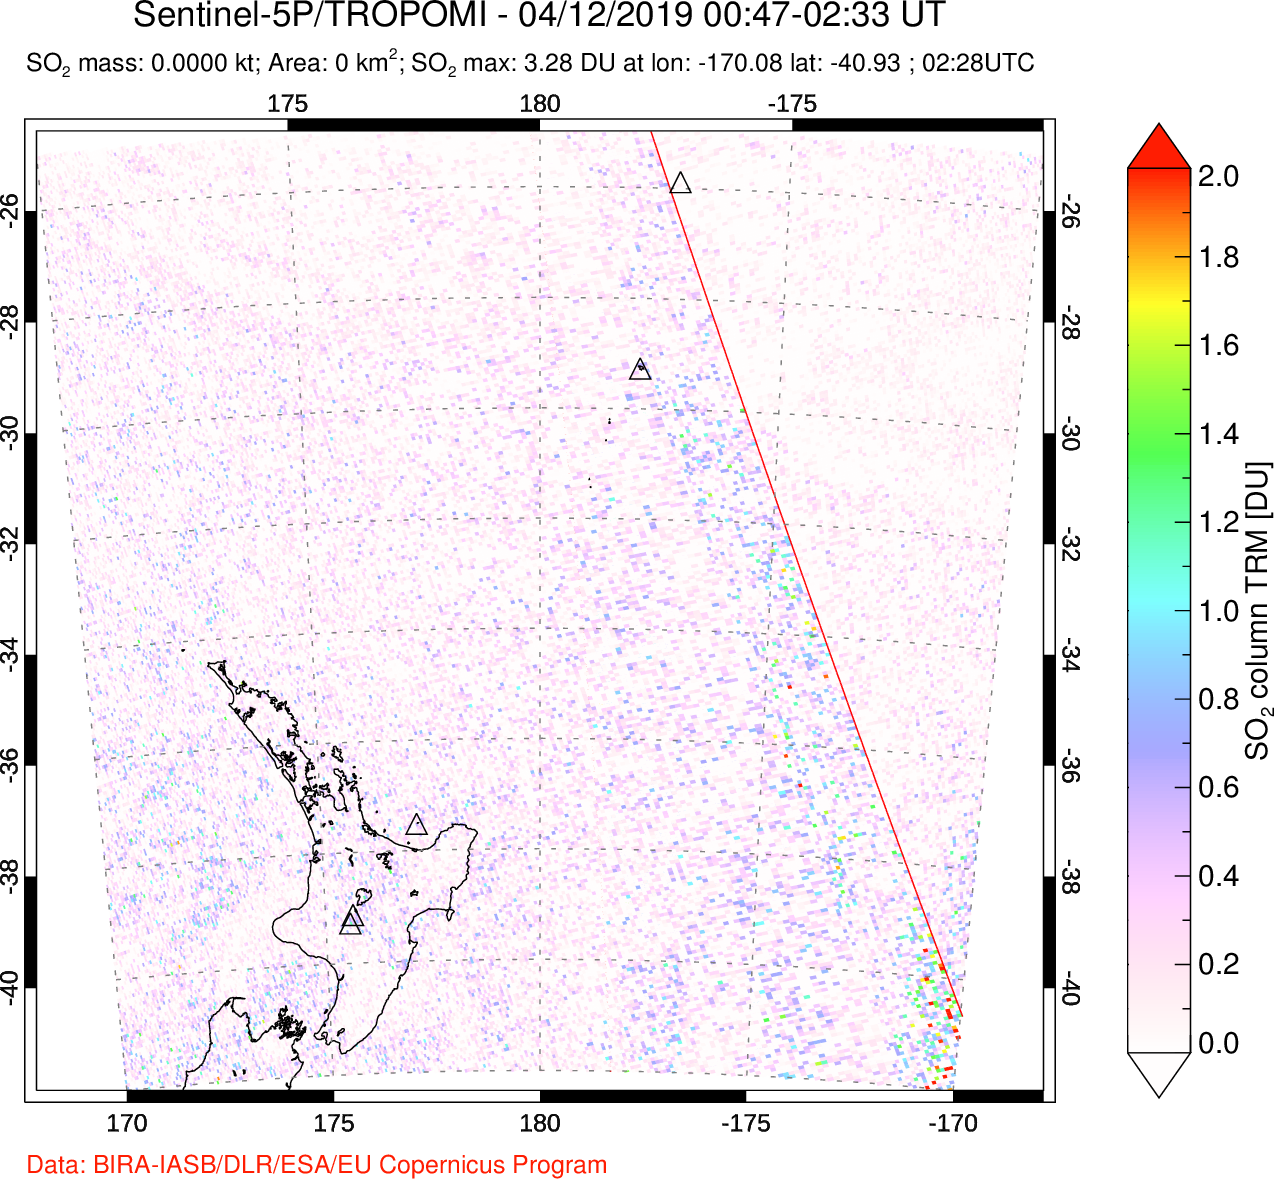 A sulfur dioxide image over New Zealand on Apr 12, 2019.